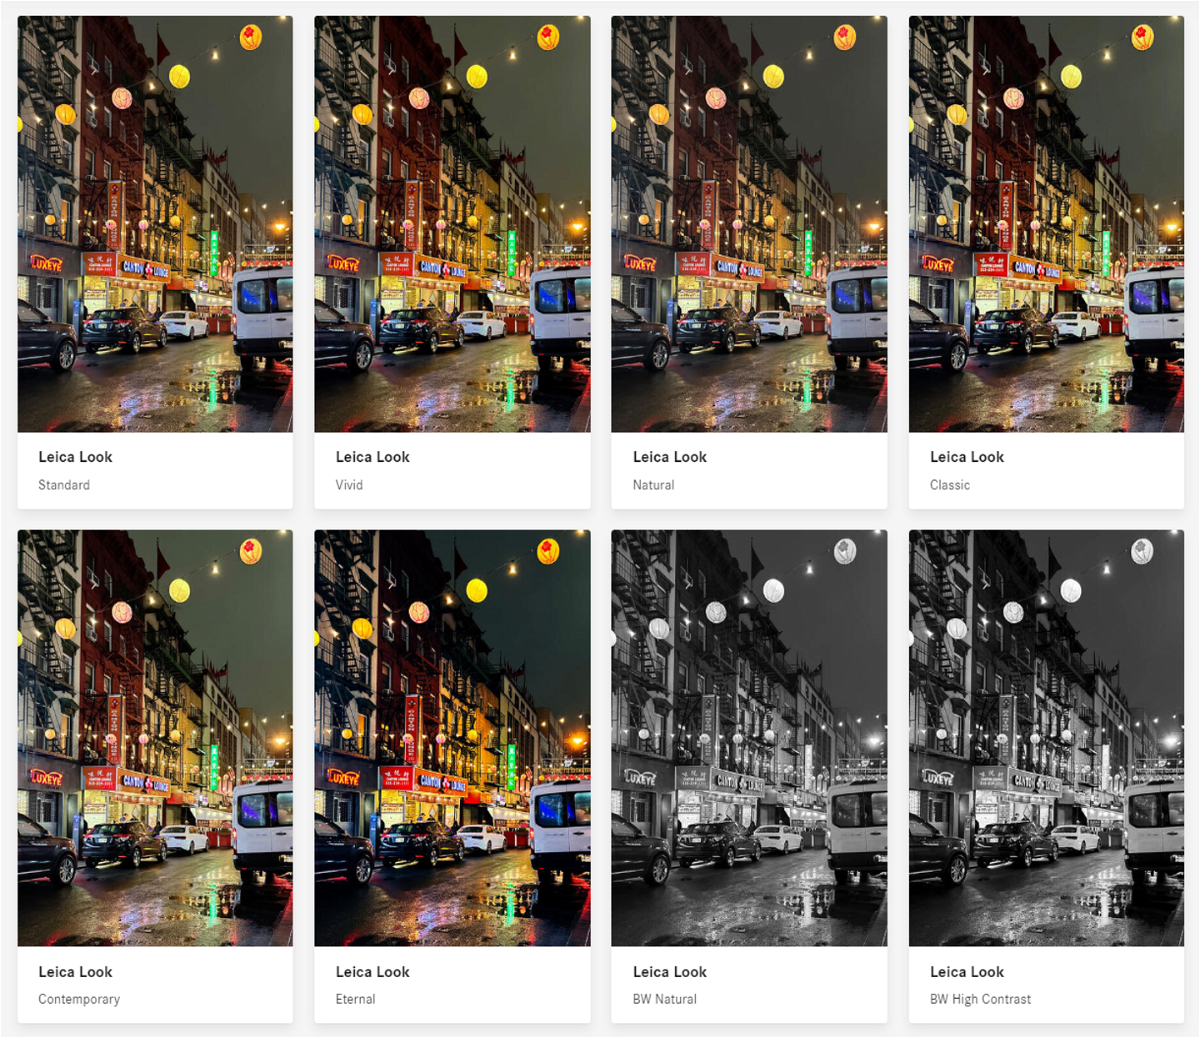 Eight of the eleven styles found in Leica LUX